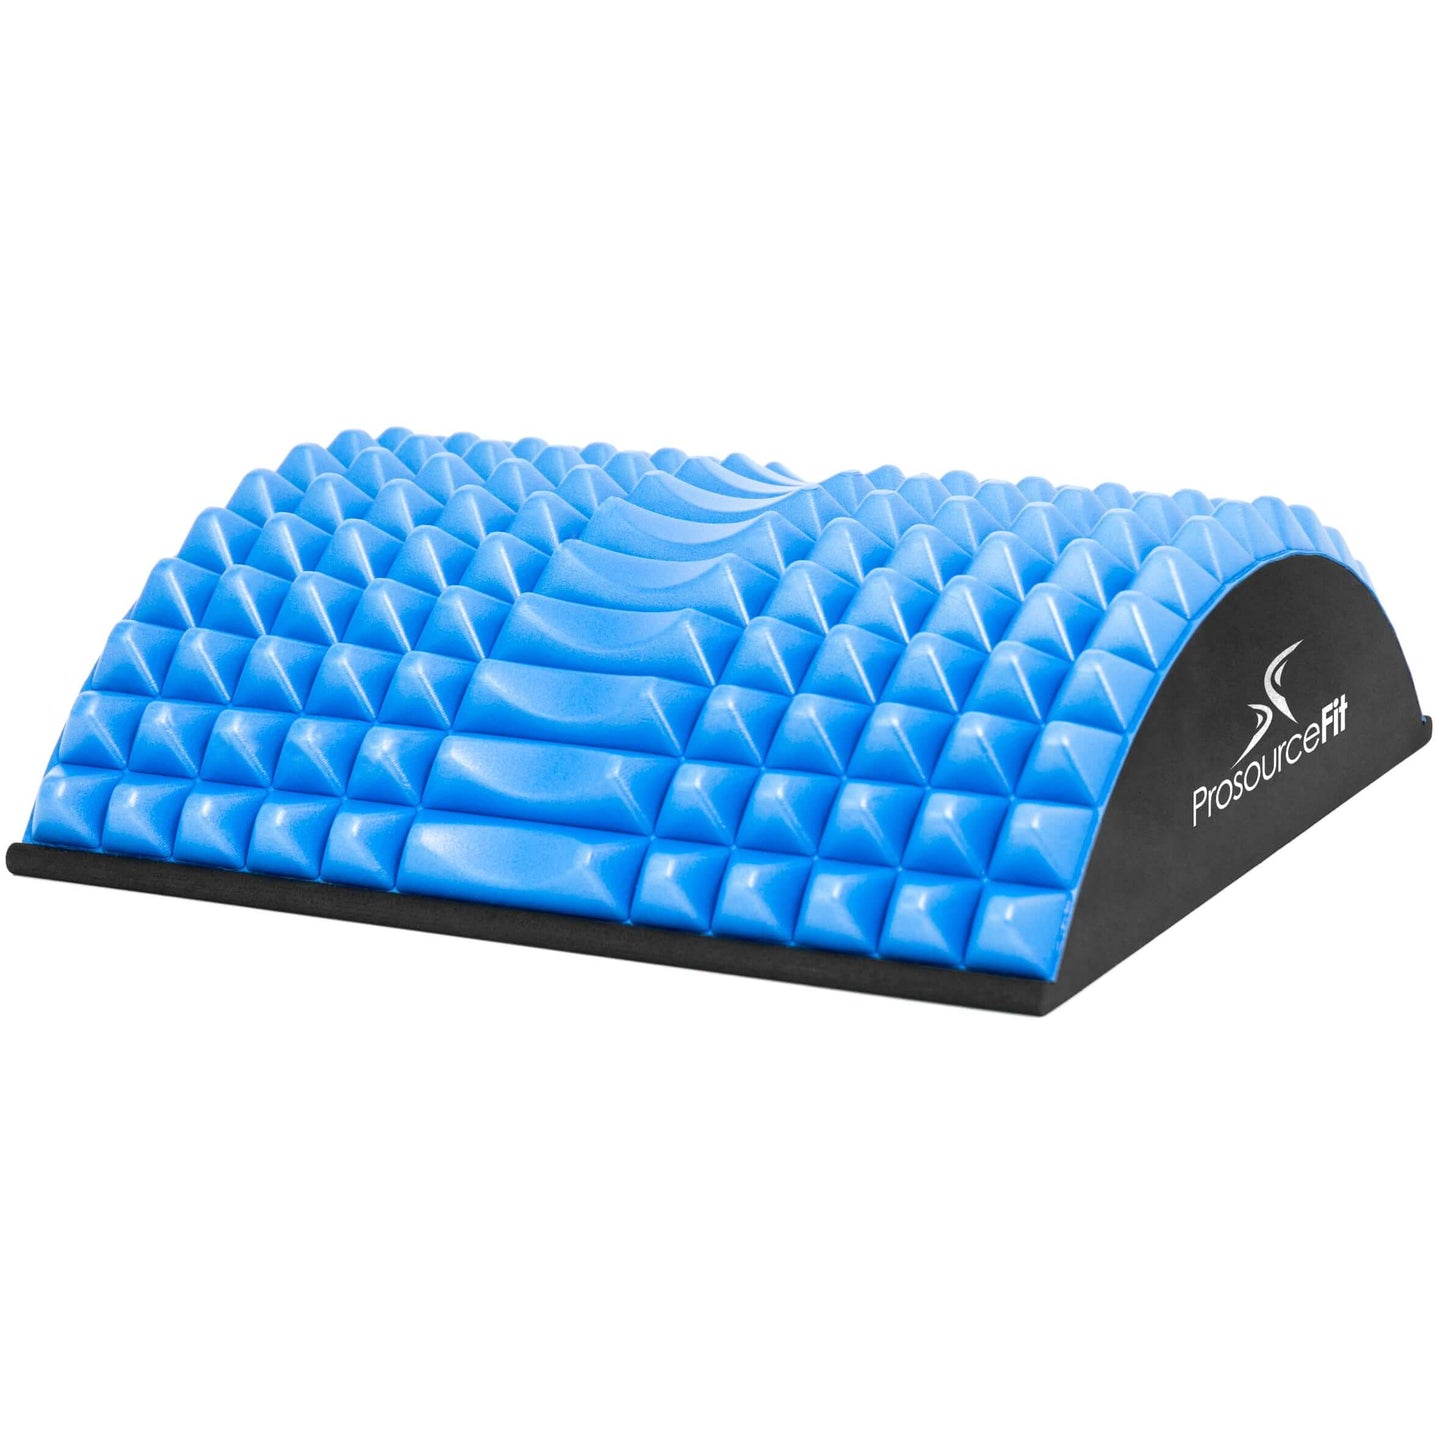 Arched Back Stretcher for Greater Flexibility and Better Posture by Jupiter Gear